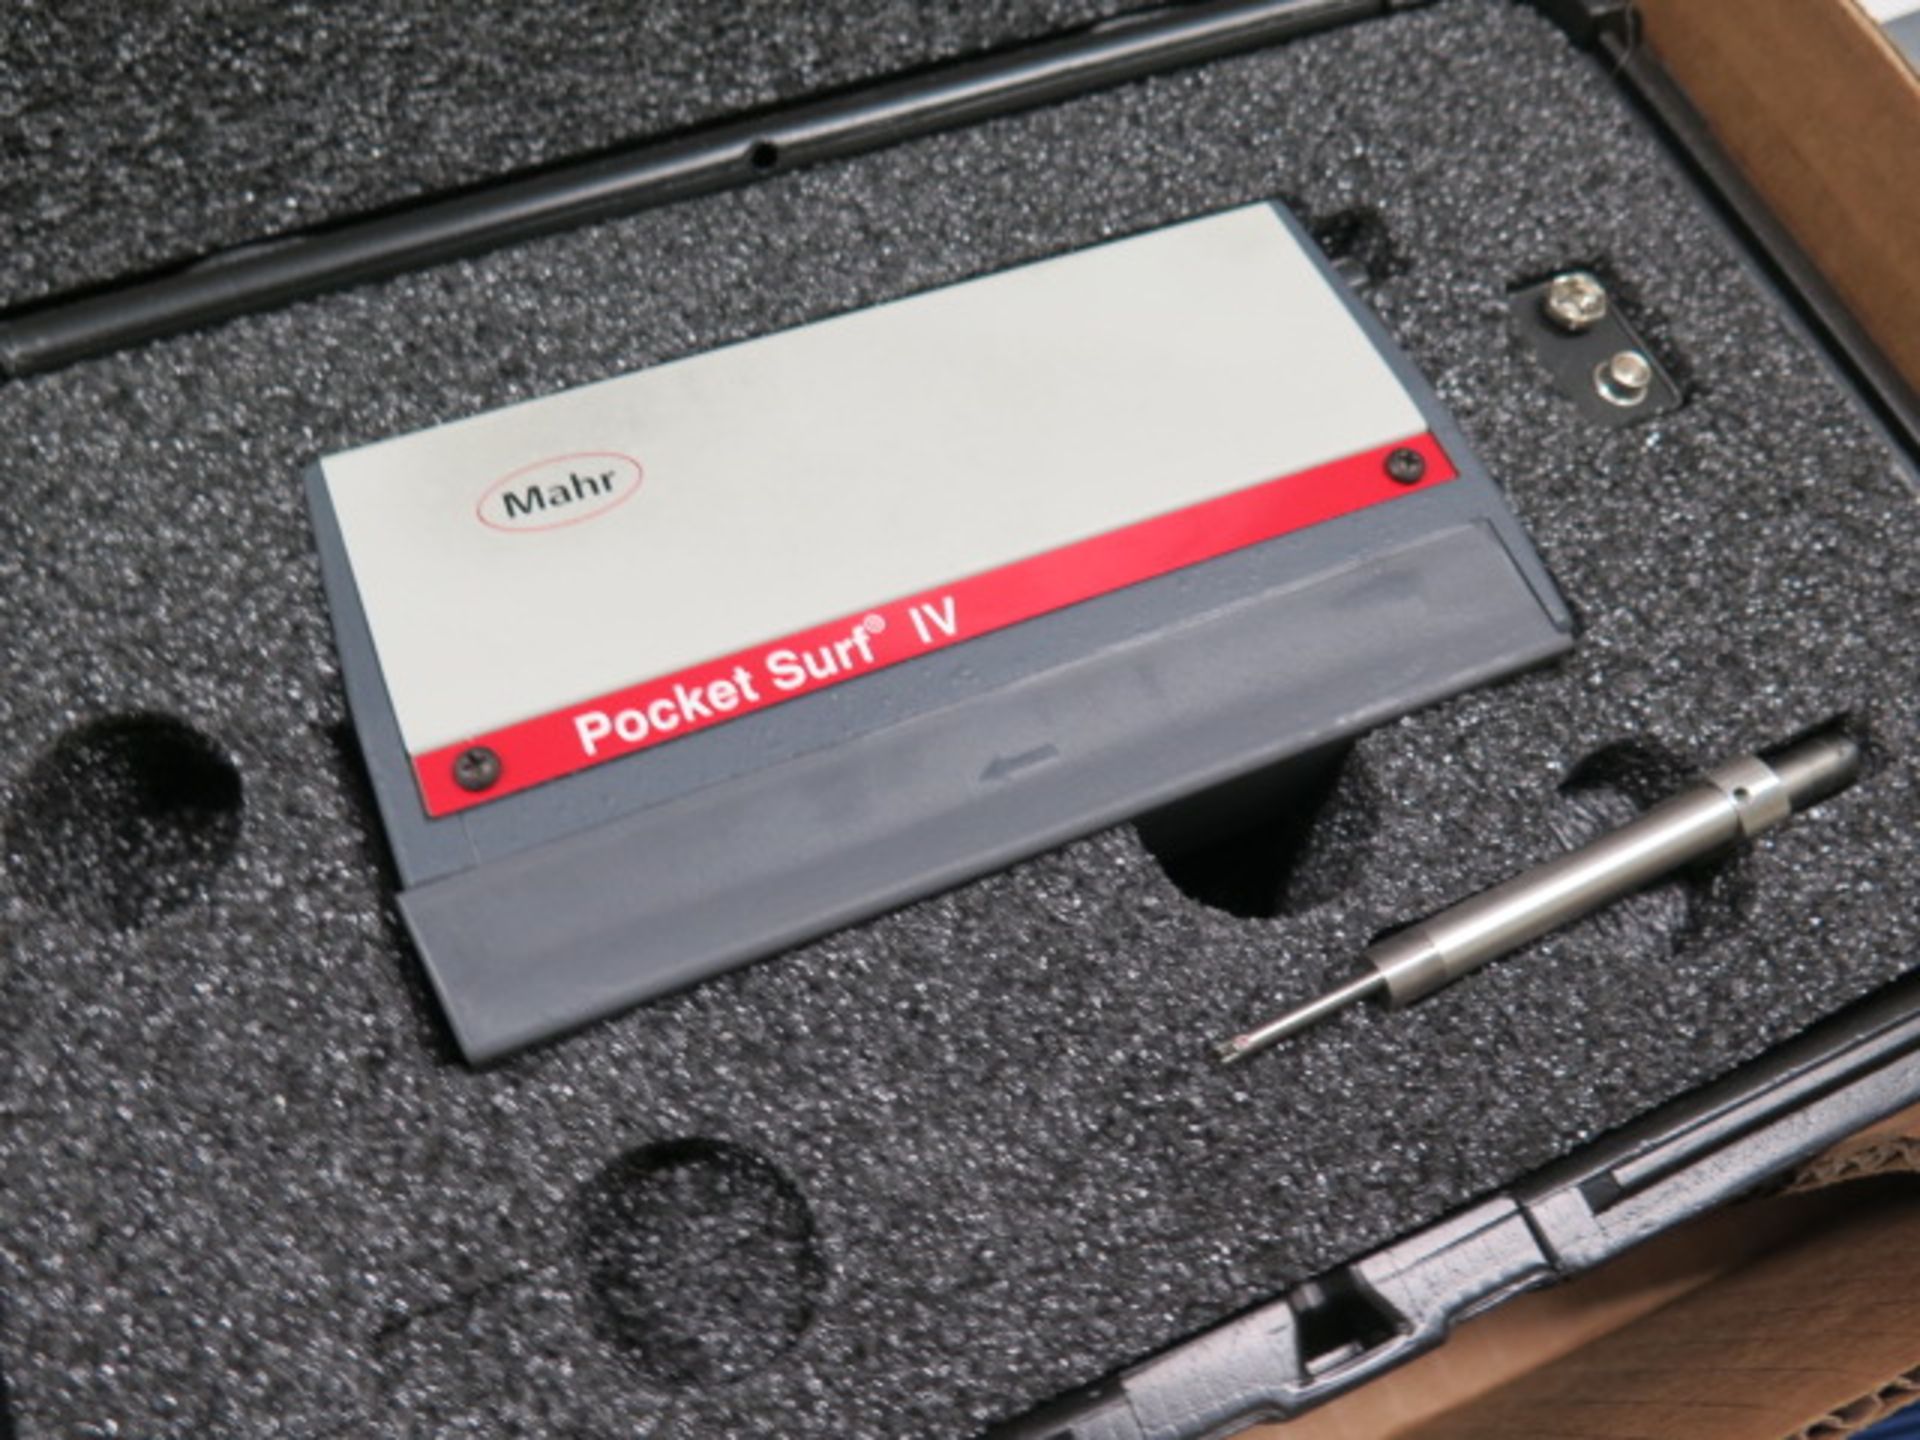 Mahr "Pocket Surf VI" Digital Surface Roughness Gage (SOLD AS-IS - NO WARRANTY) - Image 3 of 6